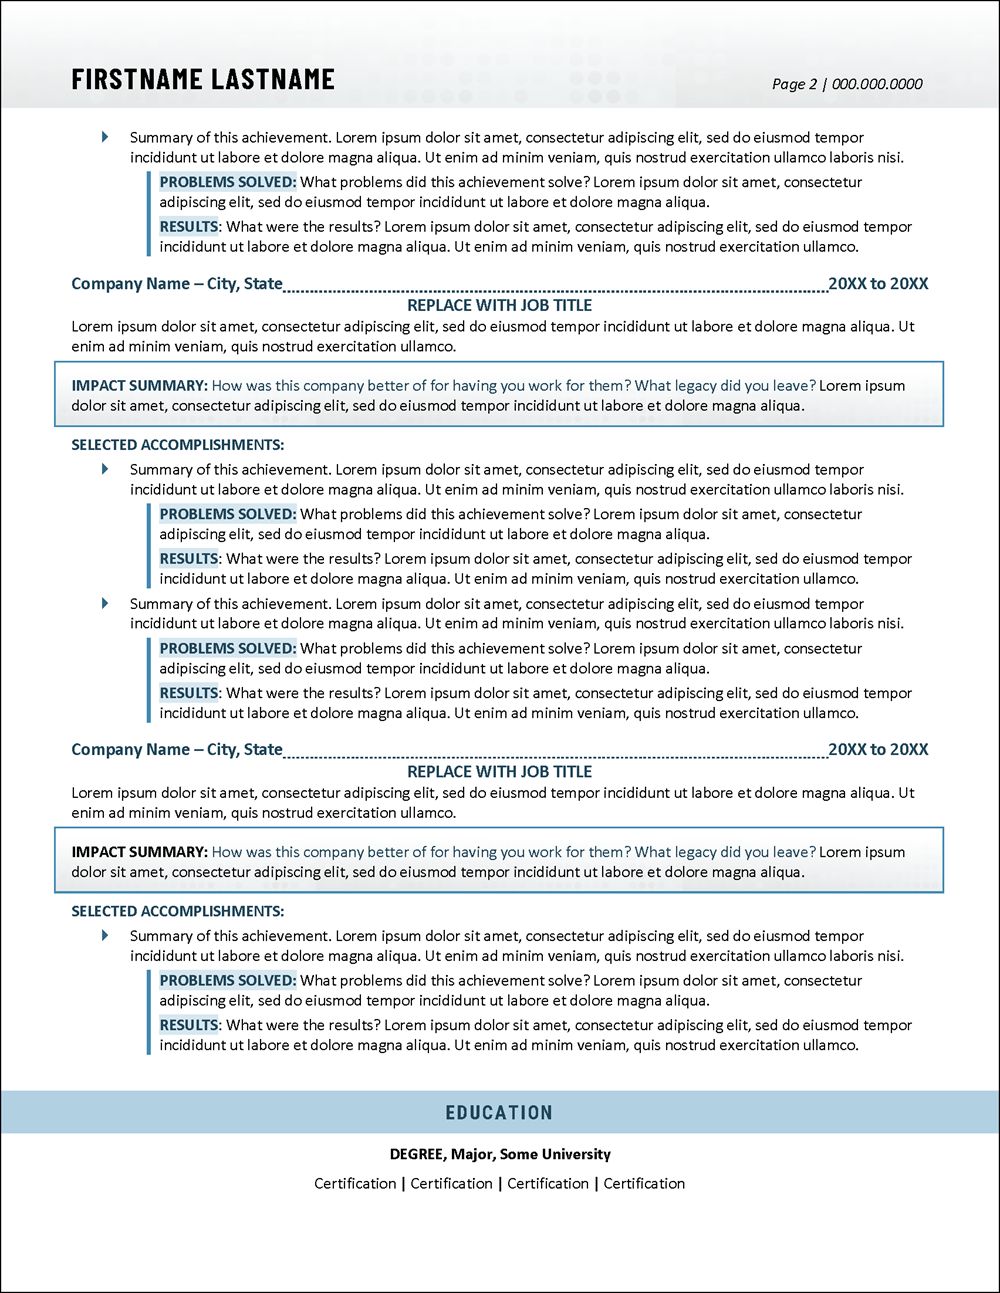 Resume Template for Executive Leaders Page 2